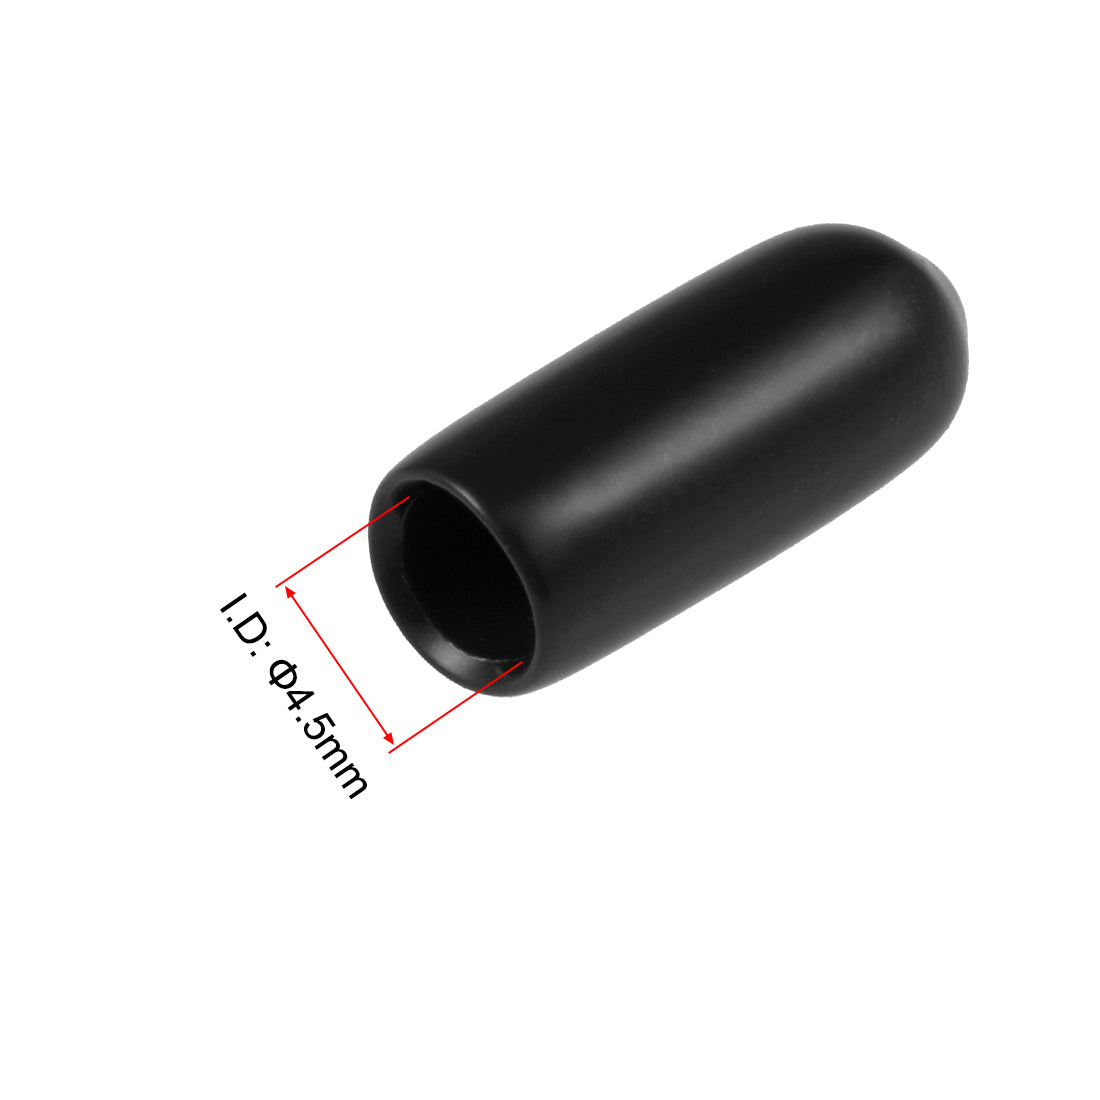 uxcell Uxcell Screw Thread Protector, 4.5mm ID Round End Cap Cover Black Tube Caps 100pcs